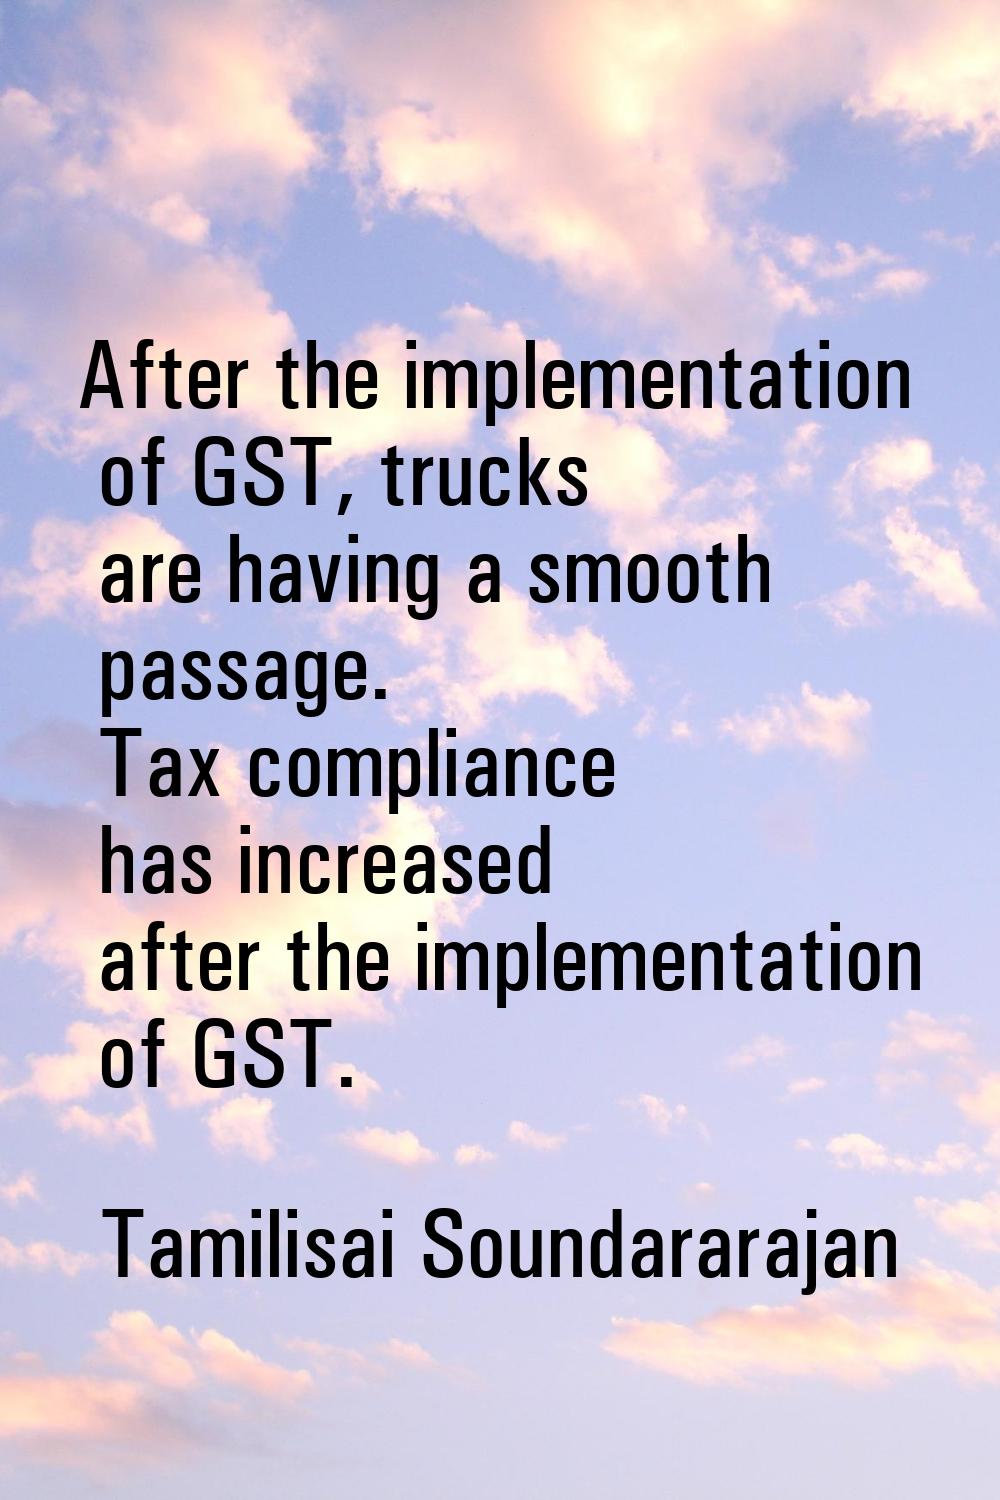 After the implementation of GST, trucks are having a smooth passage. Tax compliance has increased a